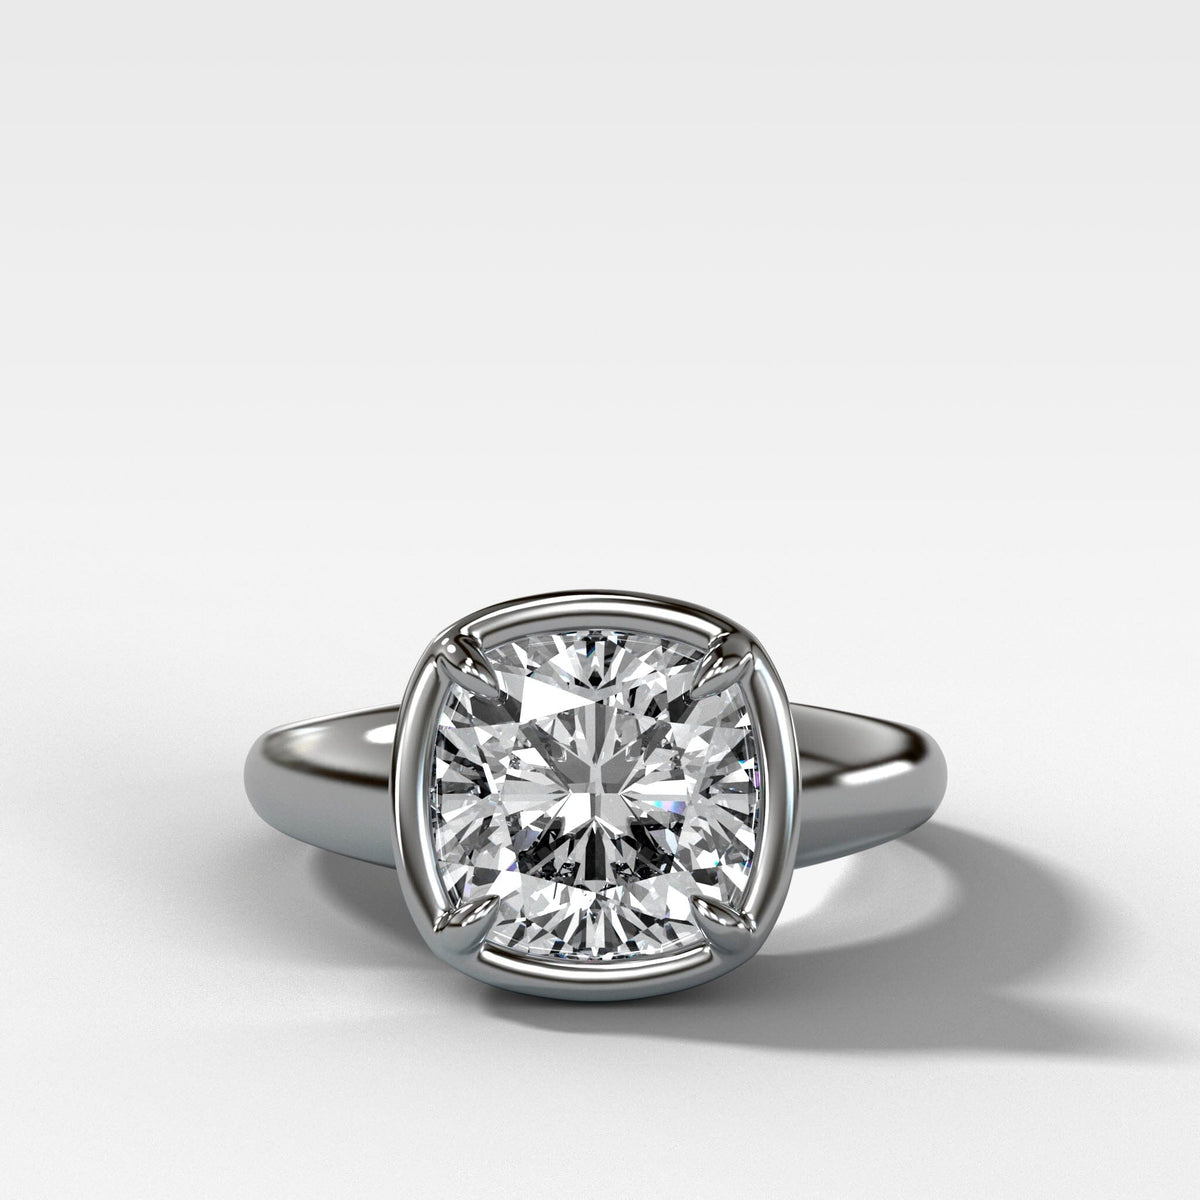 Club Ring Solitaire With a Cushion Cut Engagement Good Stone Inc 